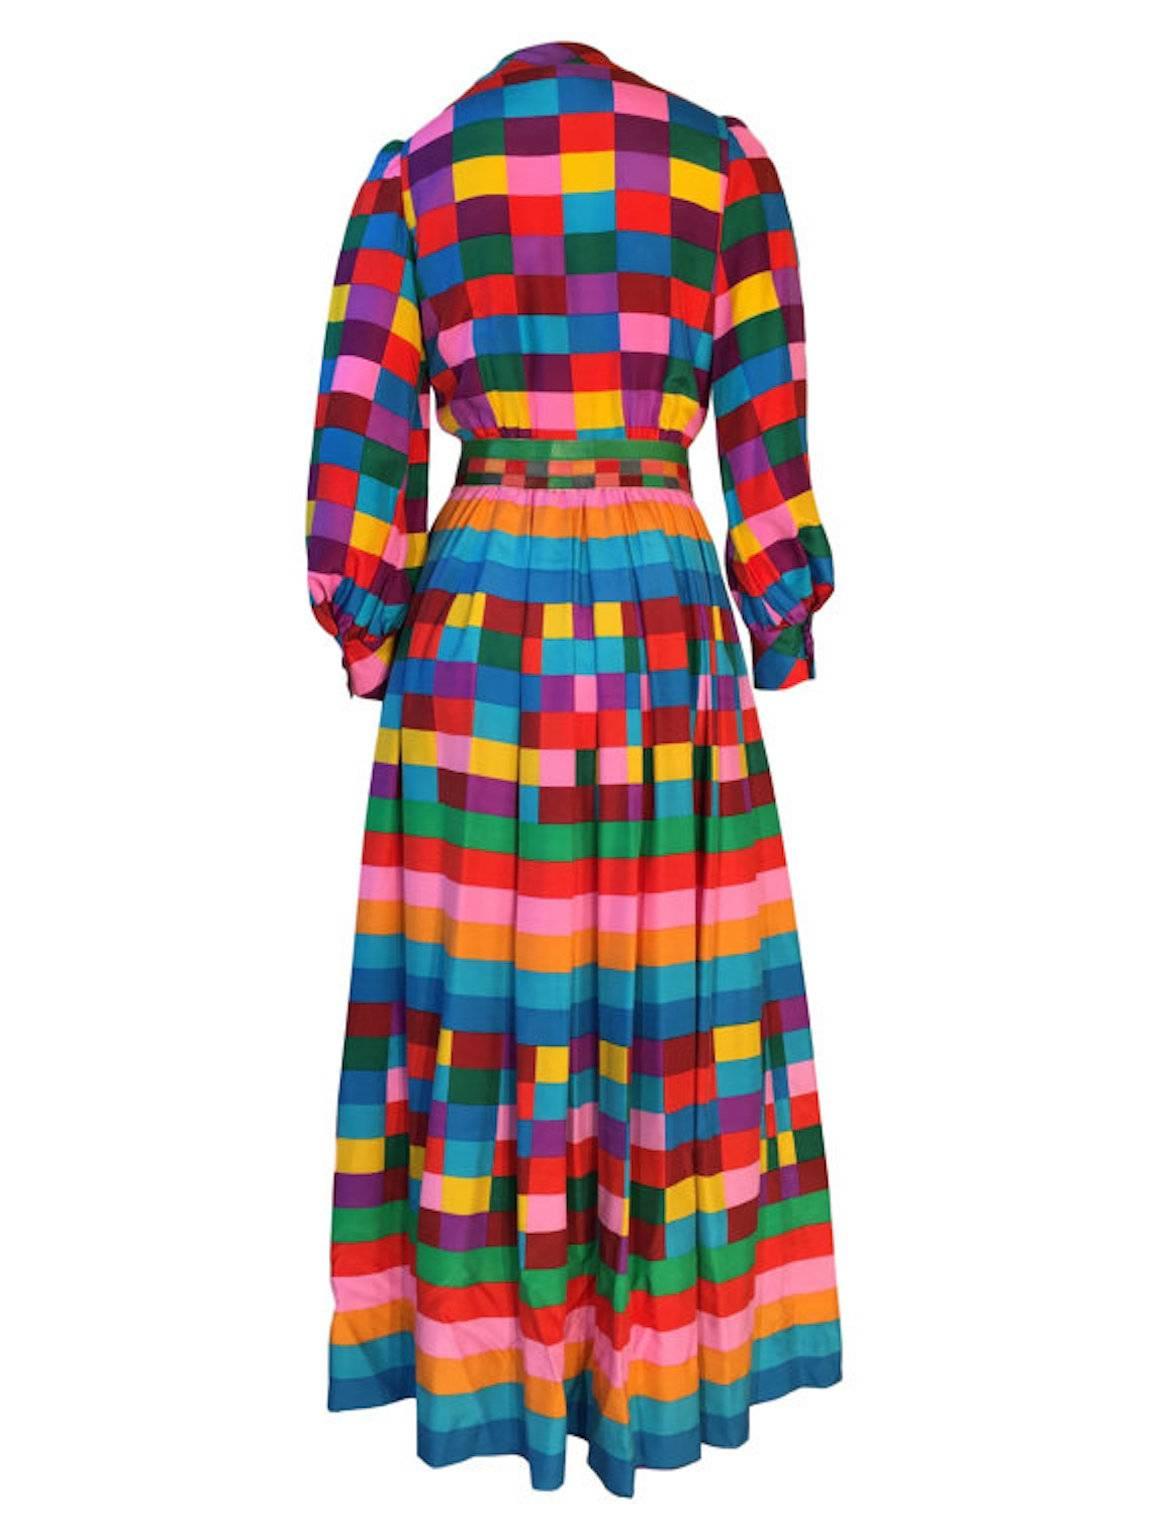 Vintage 1970s Valentino Boutique Colour Block Maxi Dress. Made from silk, buttons at the front,with long sleeves and fitted cuffs, has original leather belt with gold tone metal buckle. This design was relaunched by Valentino in 2015 named